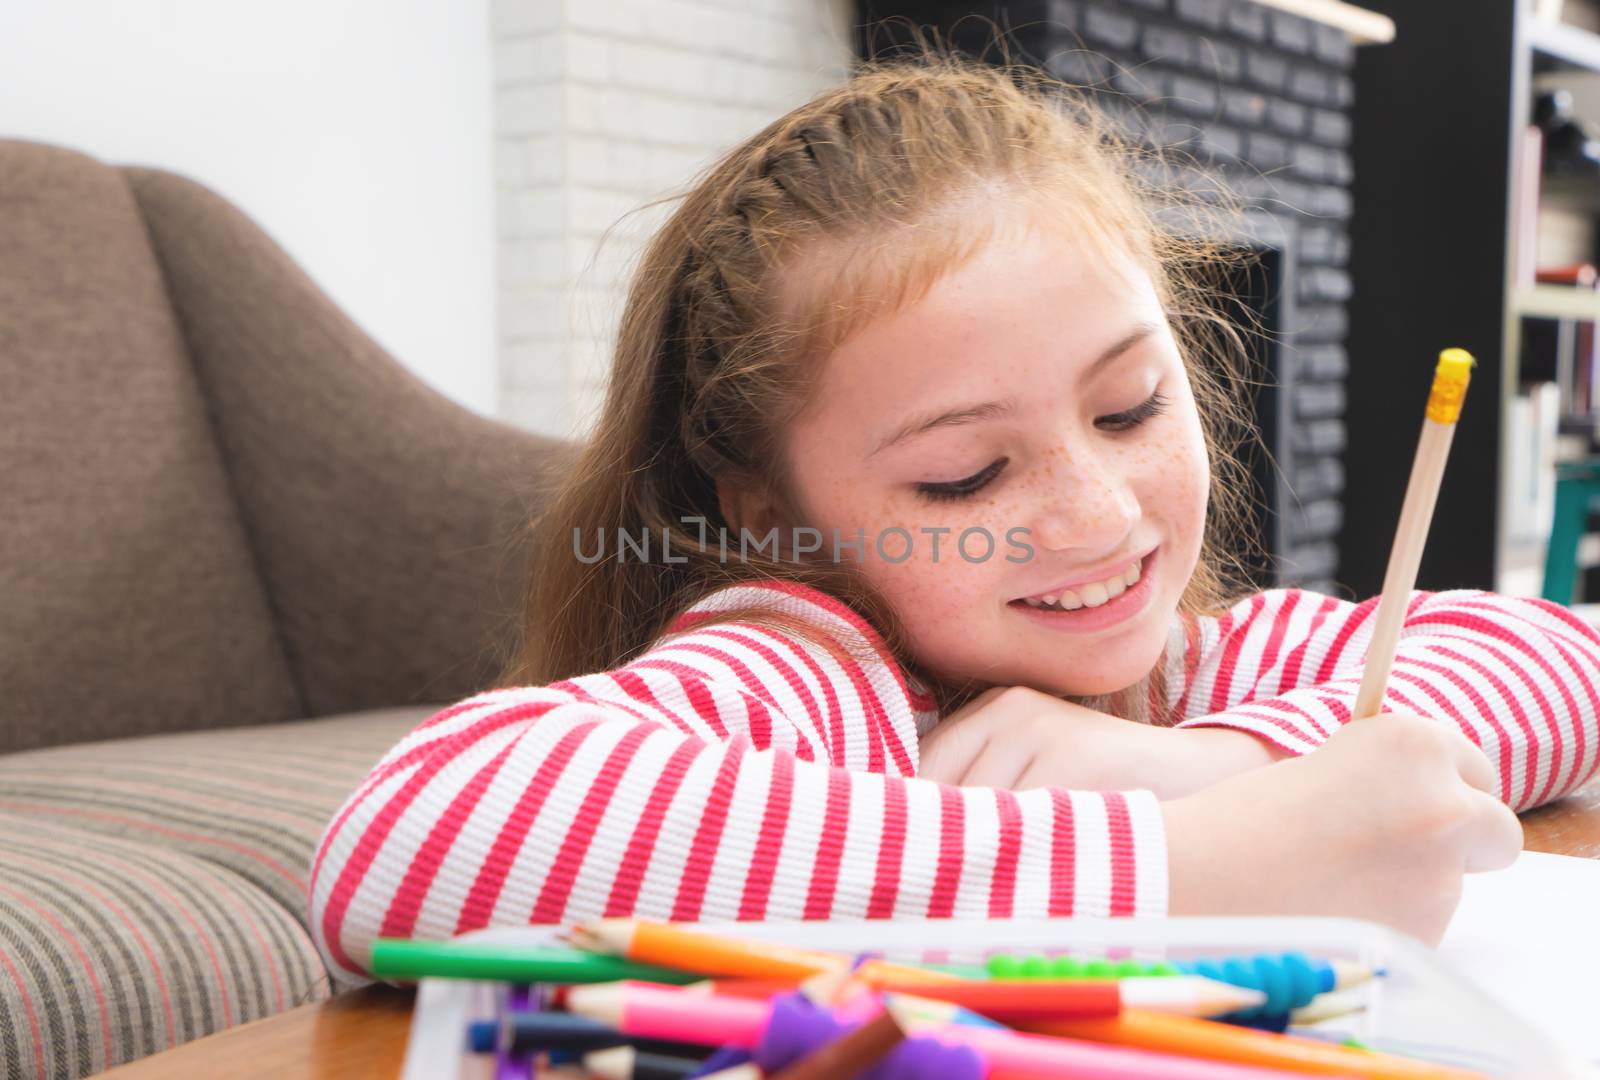 Kid Girl is pencil coloring on paper in living room by junce